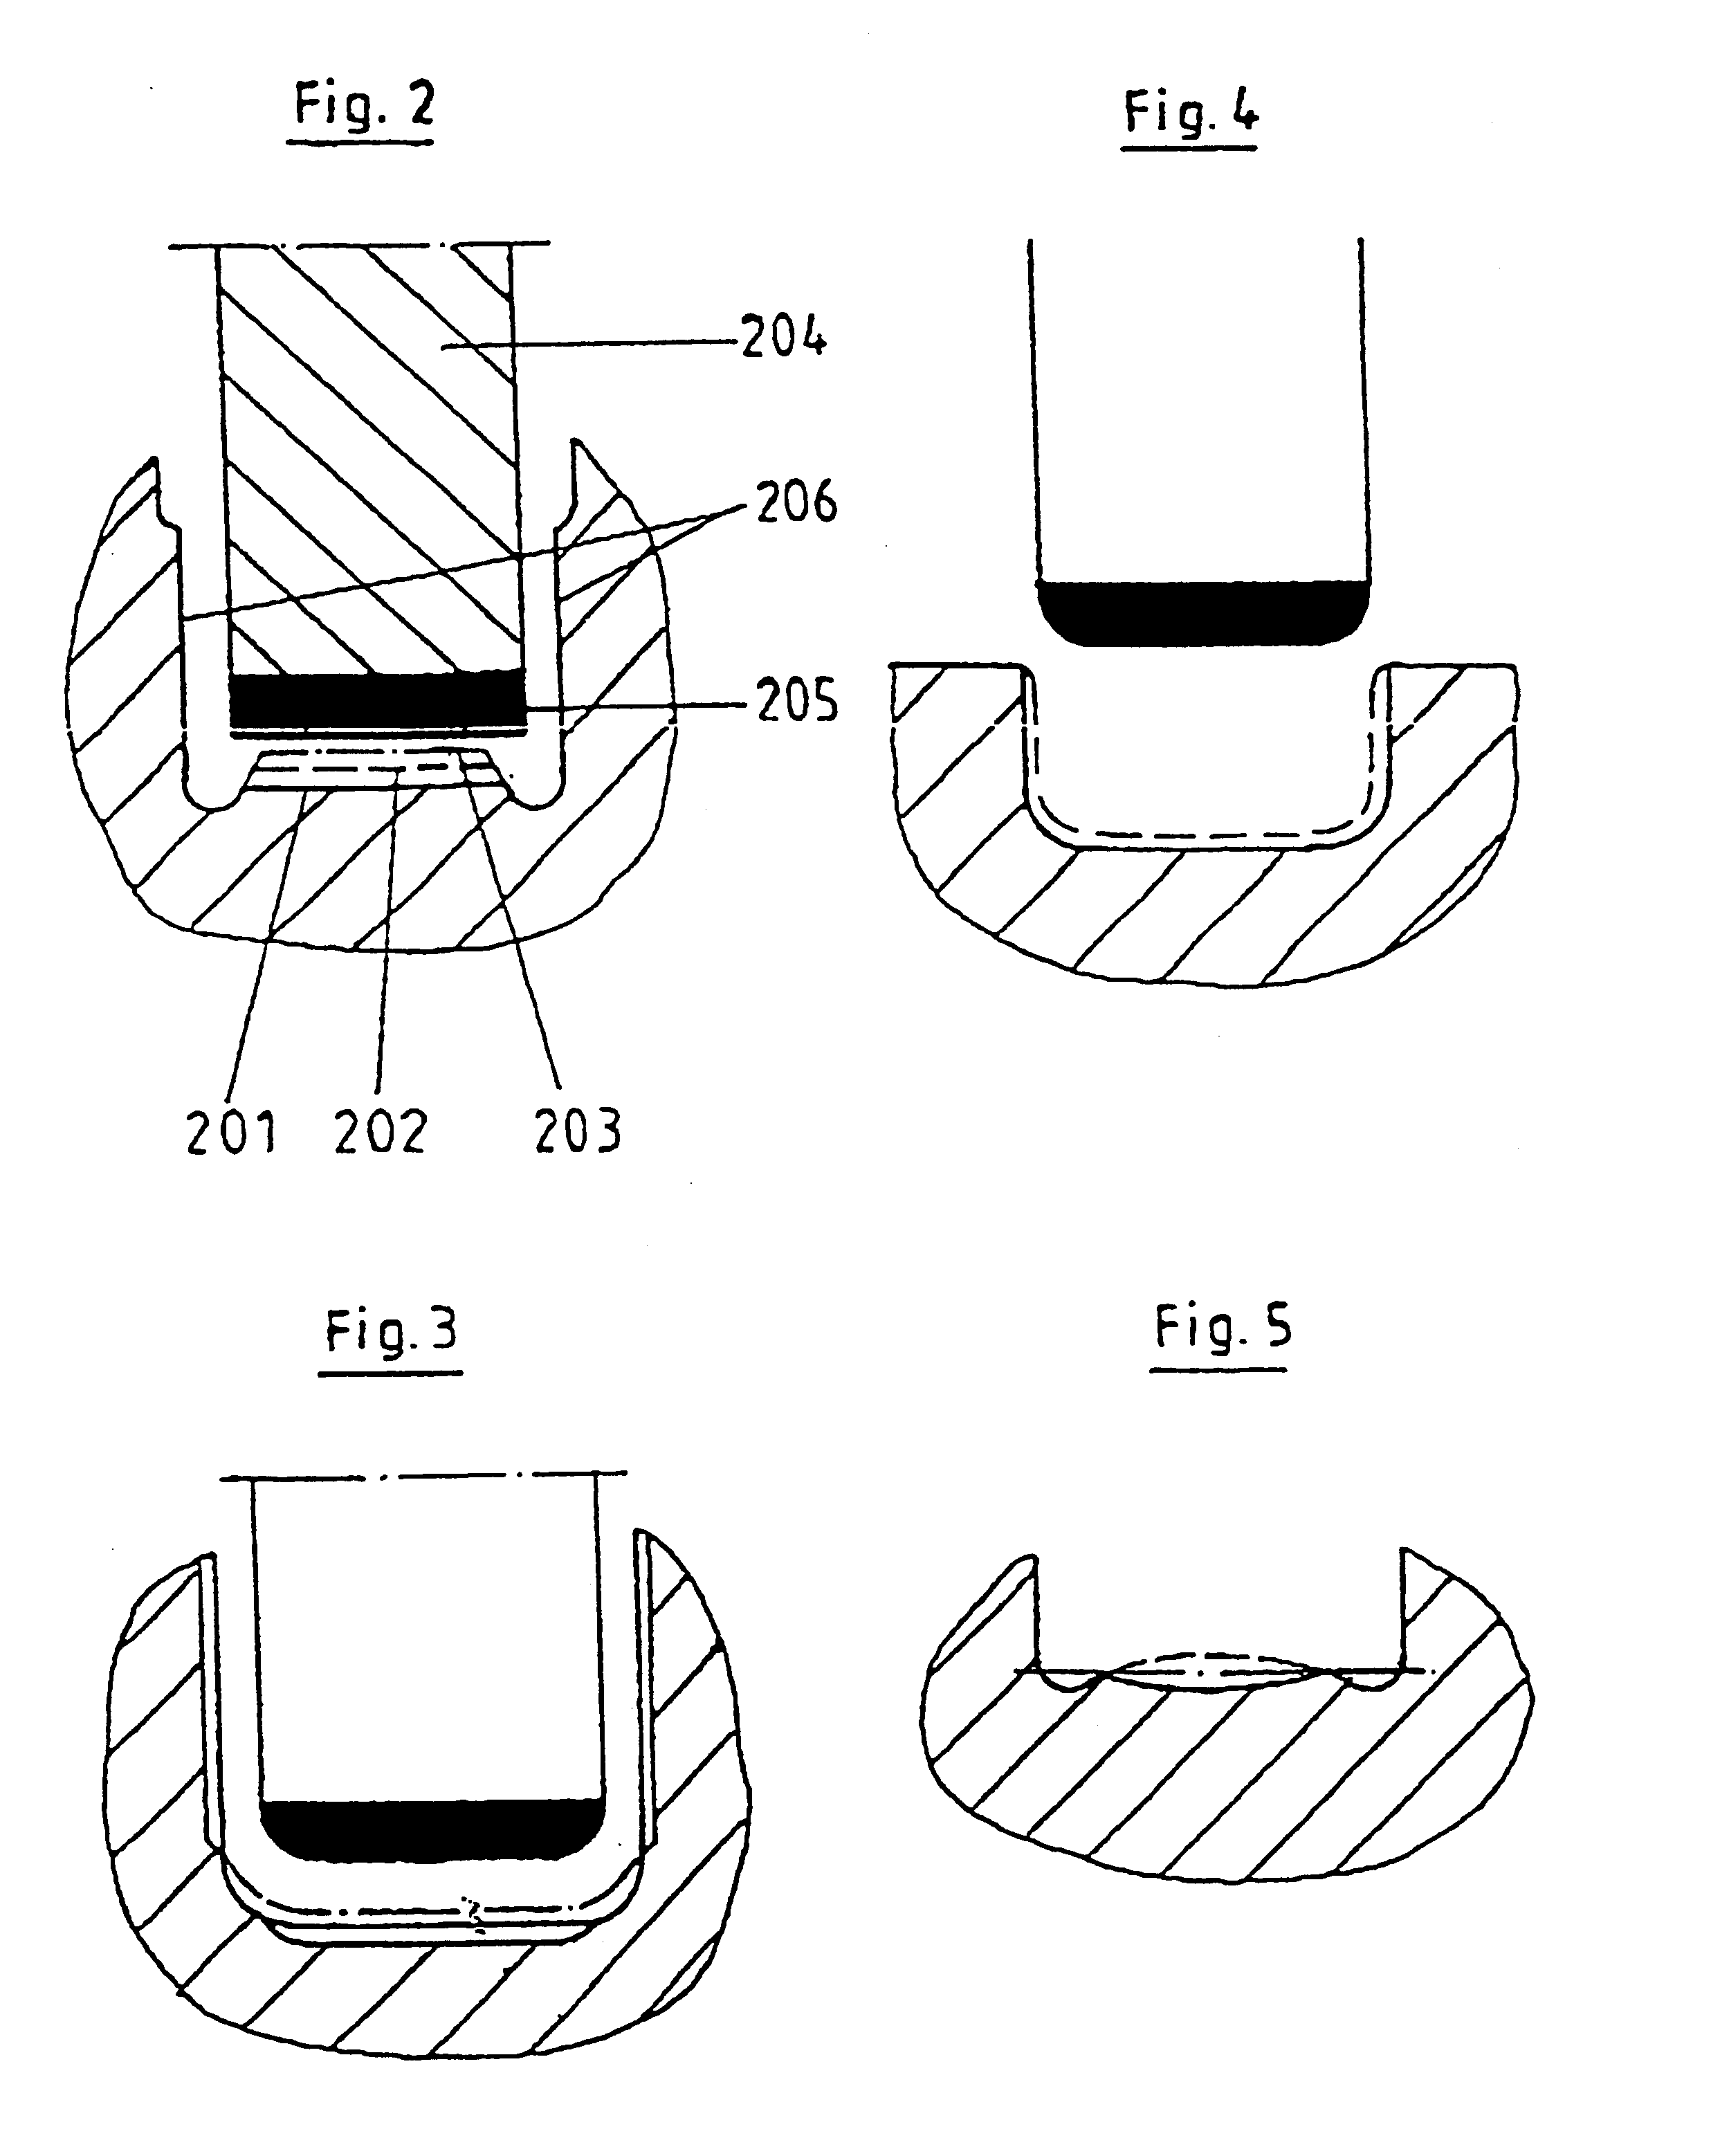 Rough- and finish-grinding of a crankshaft in one set-up